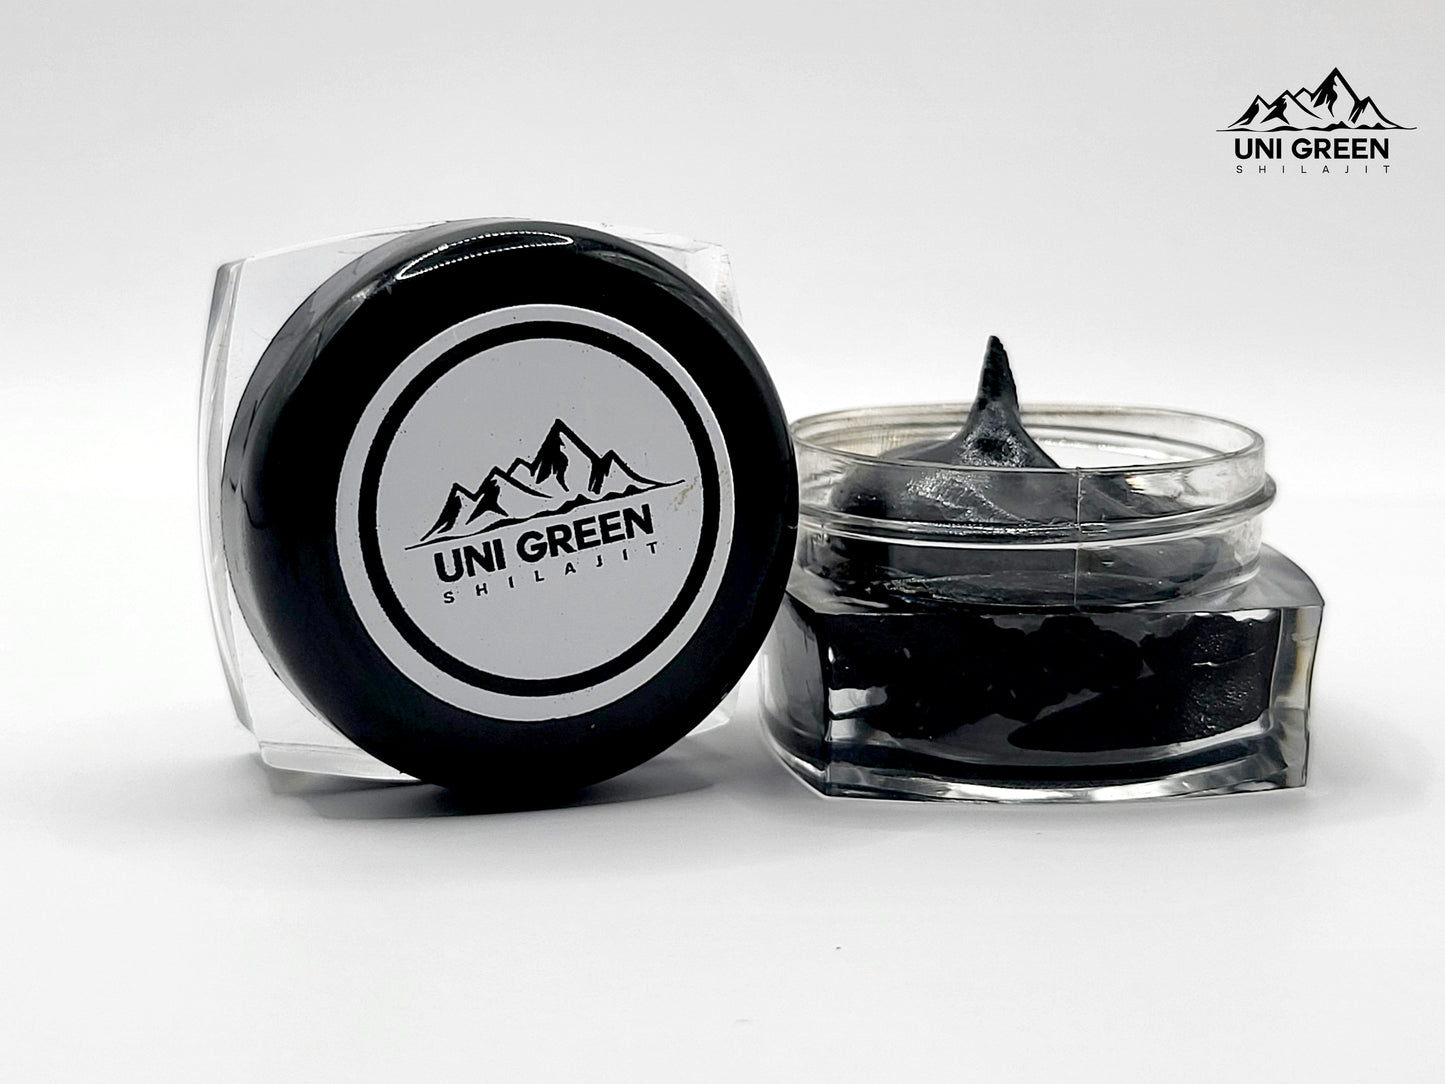 Unigreen Shilajit, your natural path to vitality, harvested from the pristine Himalayan mountains for a healthier you.